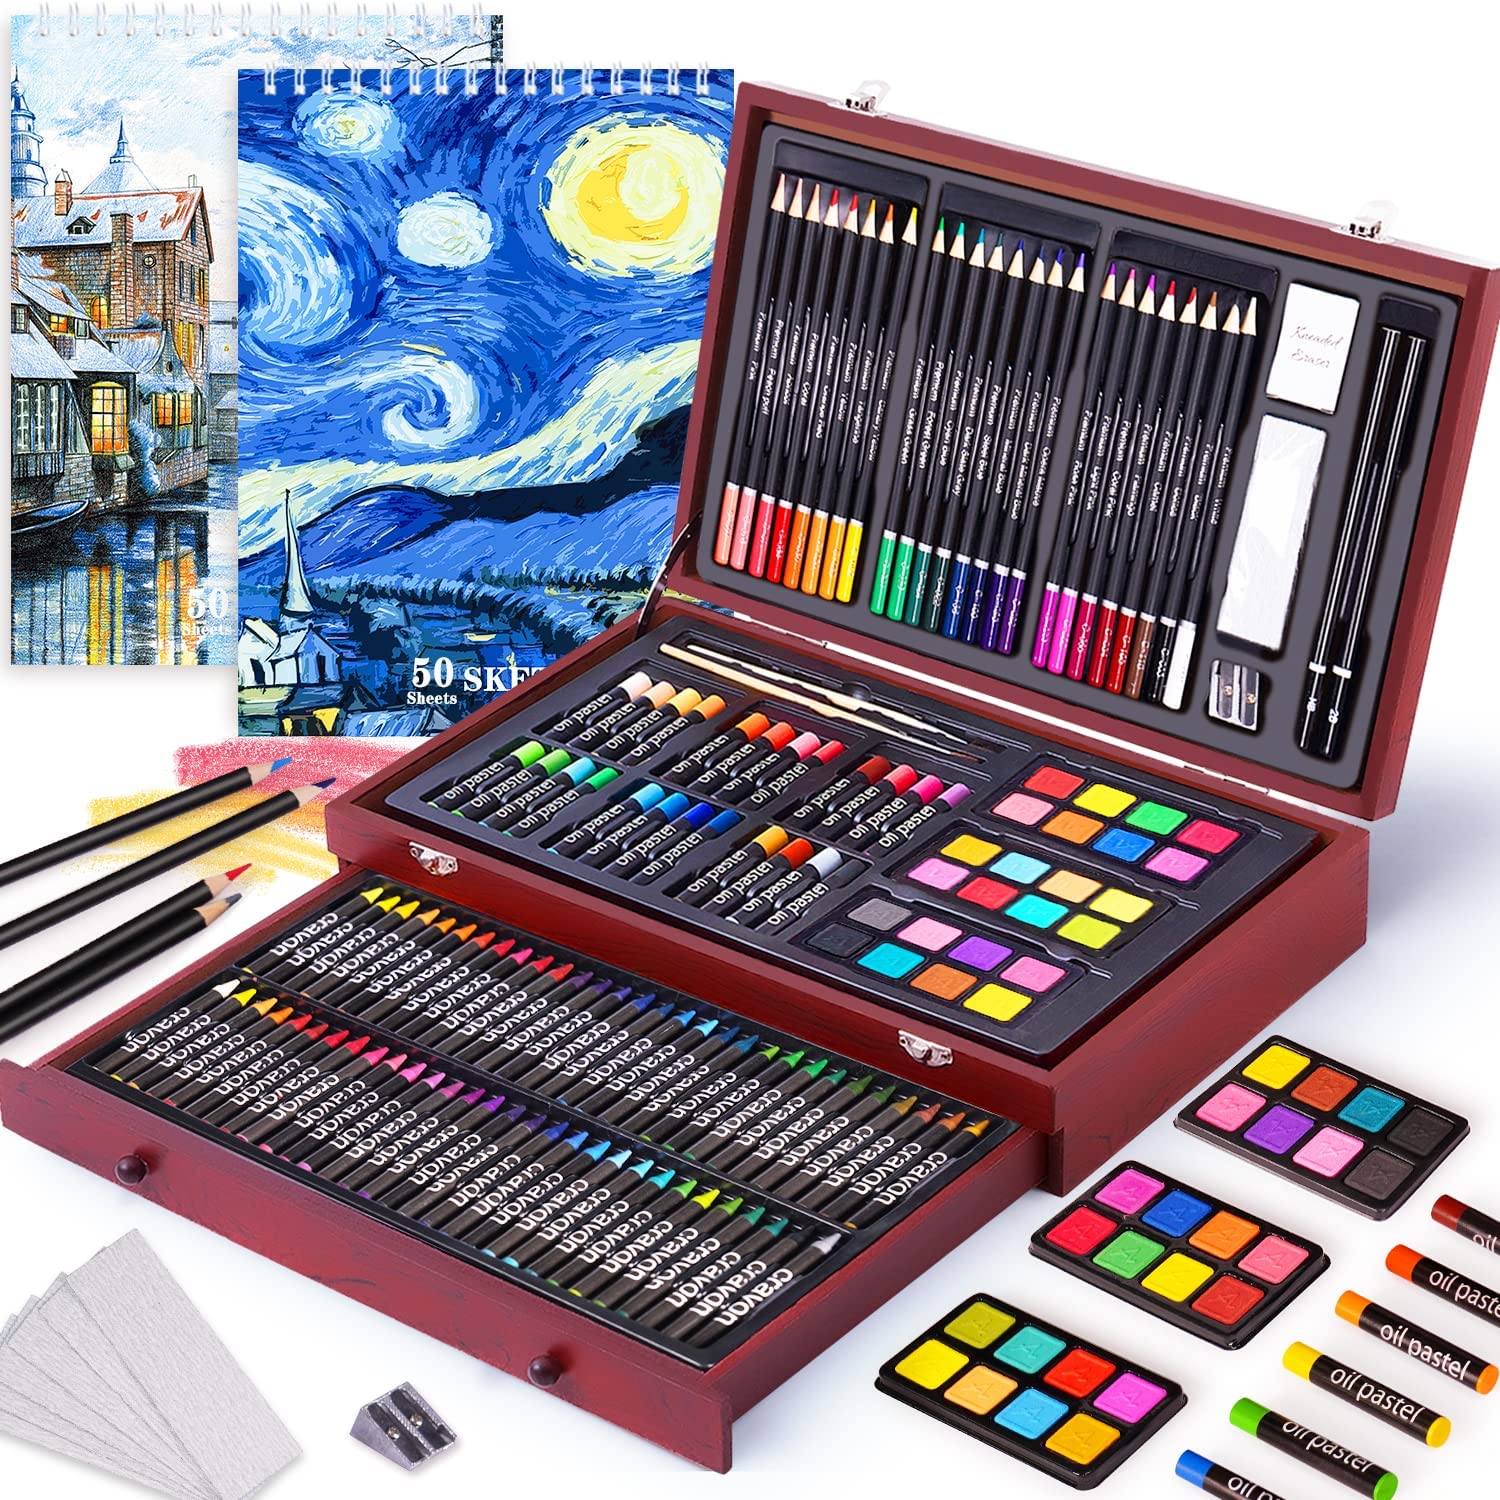 http://efficaxbargains.com/wp-content/uploads/2022/09/145-Piece-Deluxe-Art-Set-with-2-x-50-Sheet-Drawing-Pad.jpg